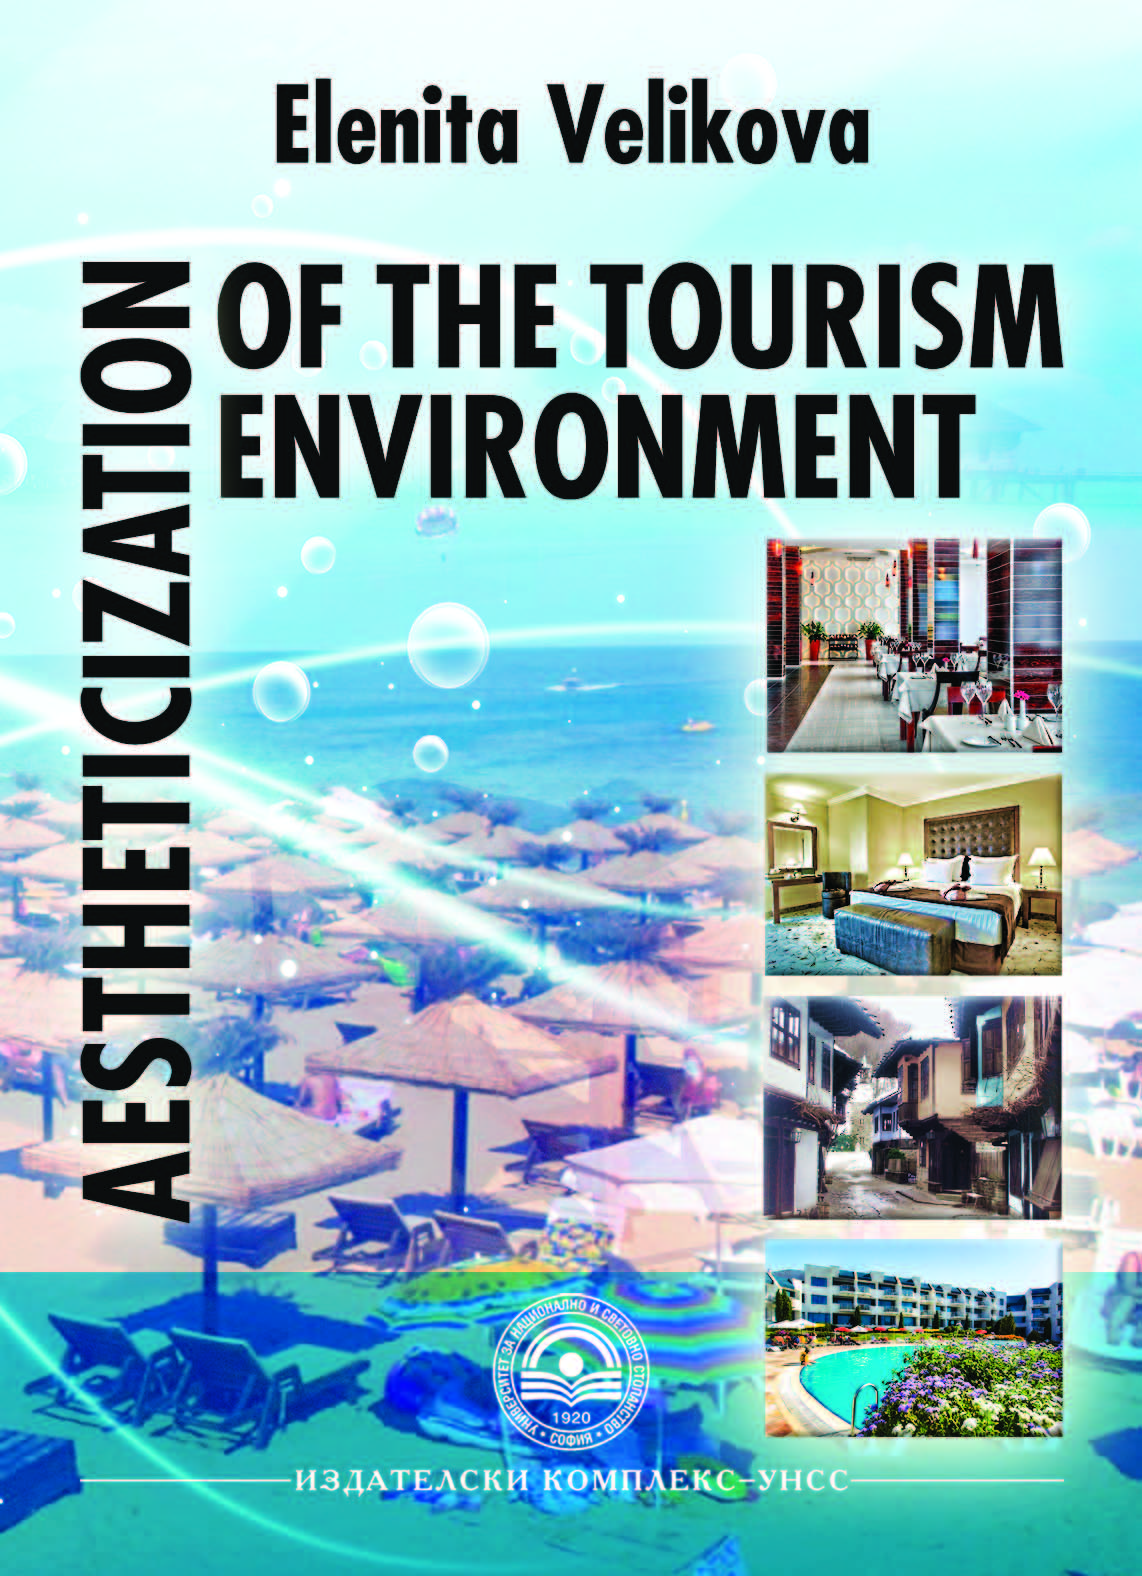 Aestheticization of the tourism environment